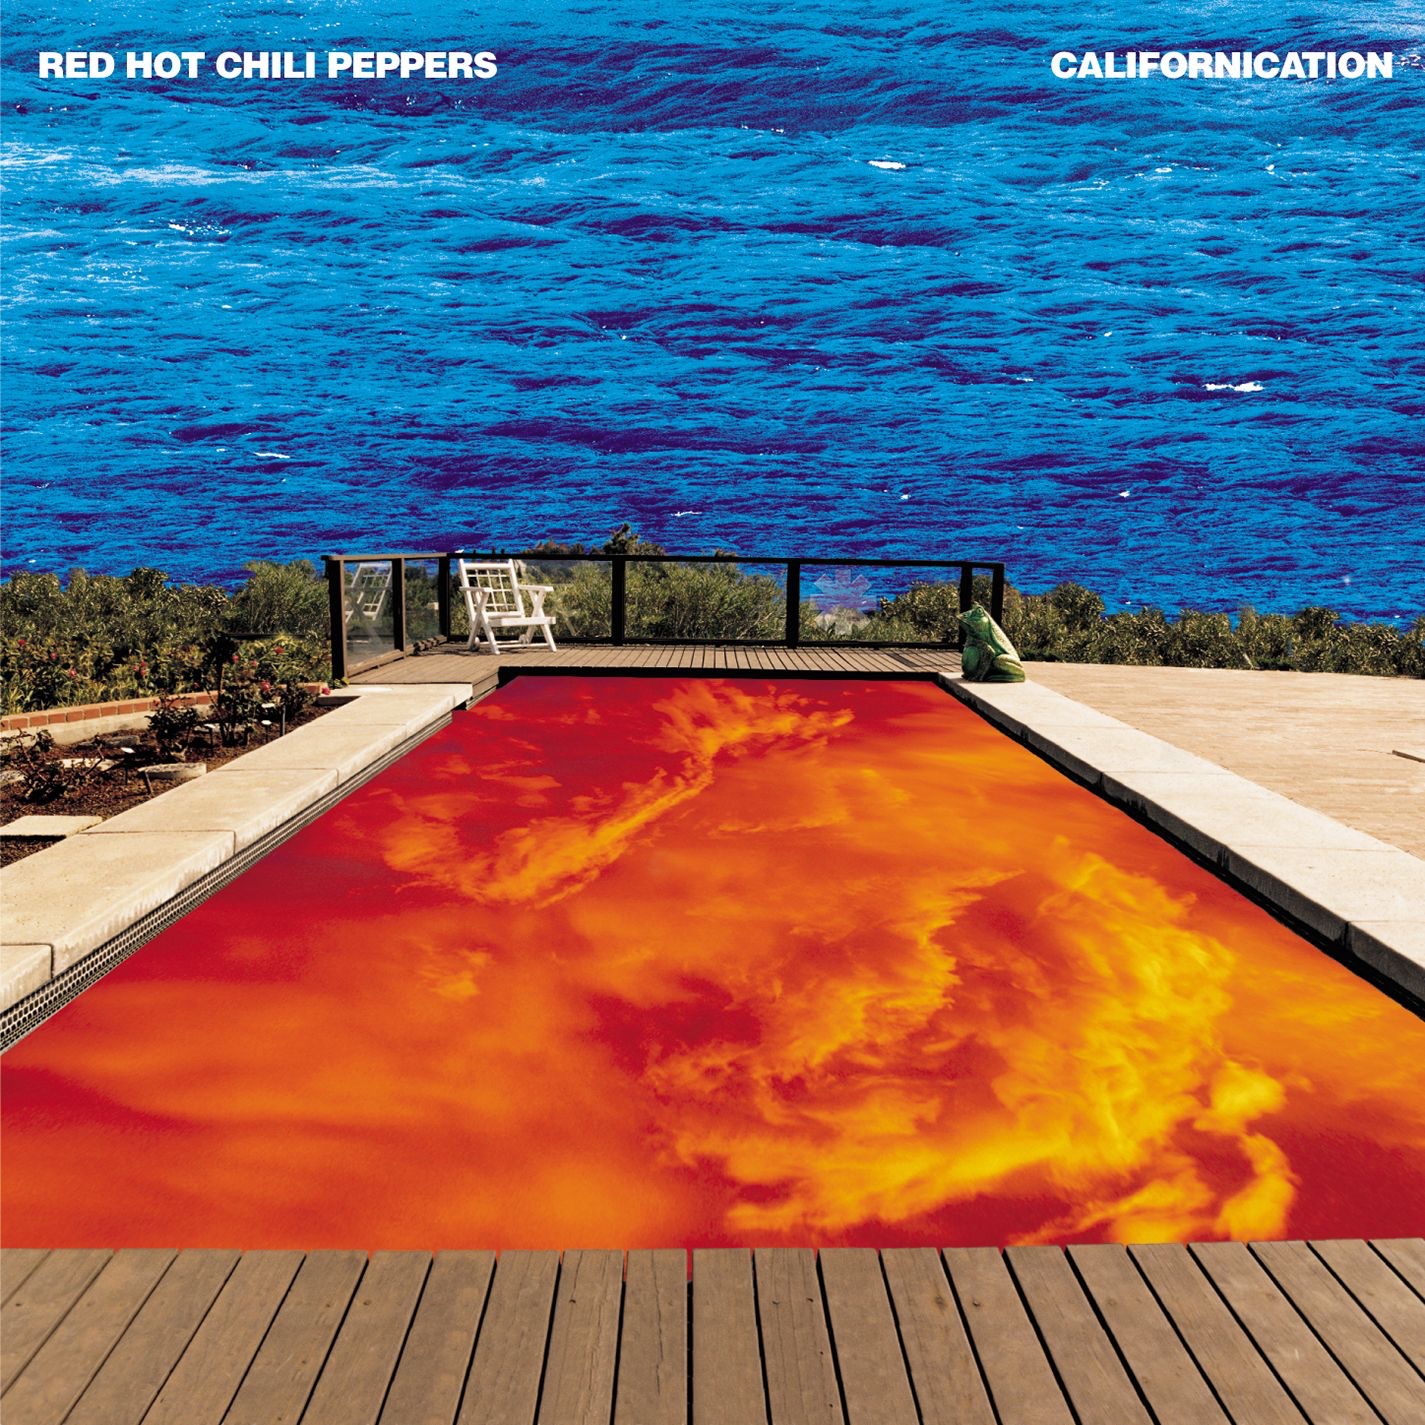 Red Hot Chili Peppers - Californication (Deluxe Edition)